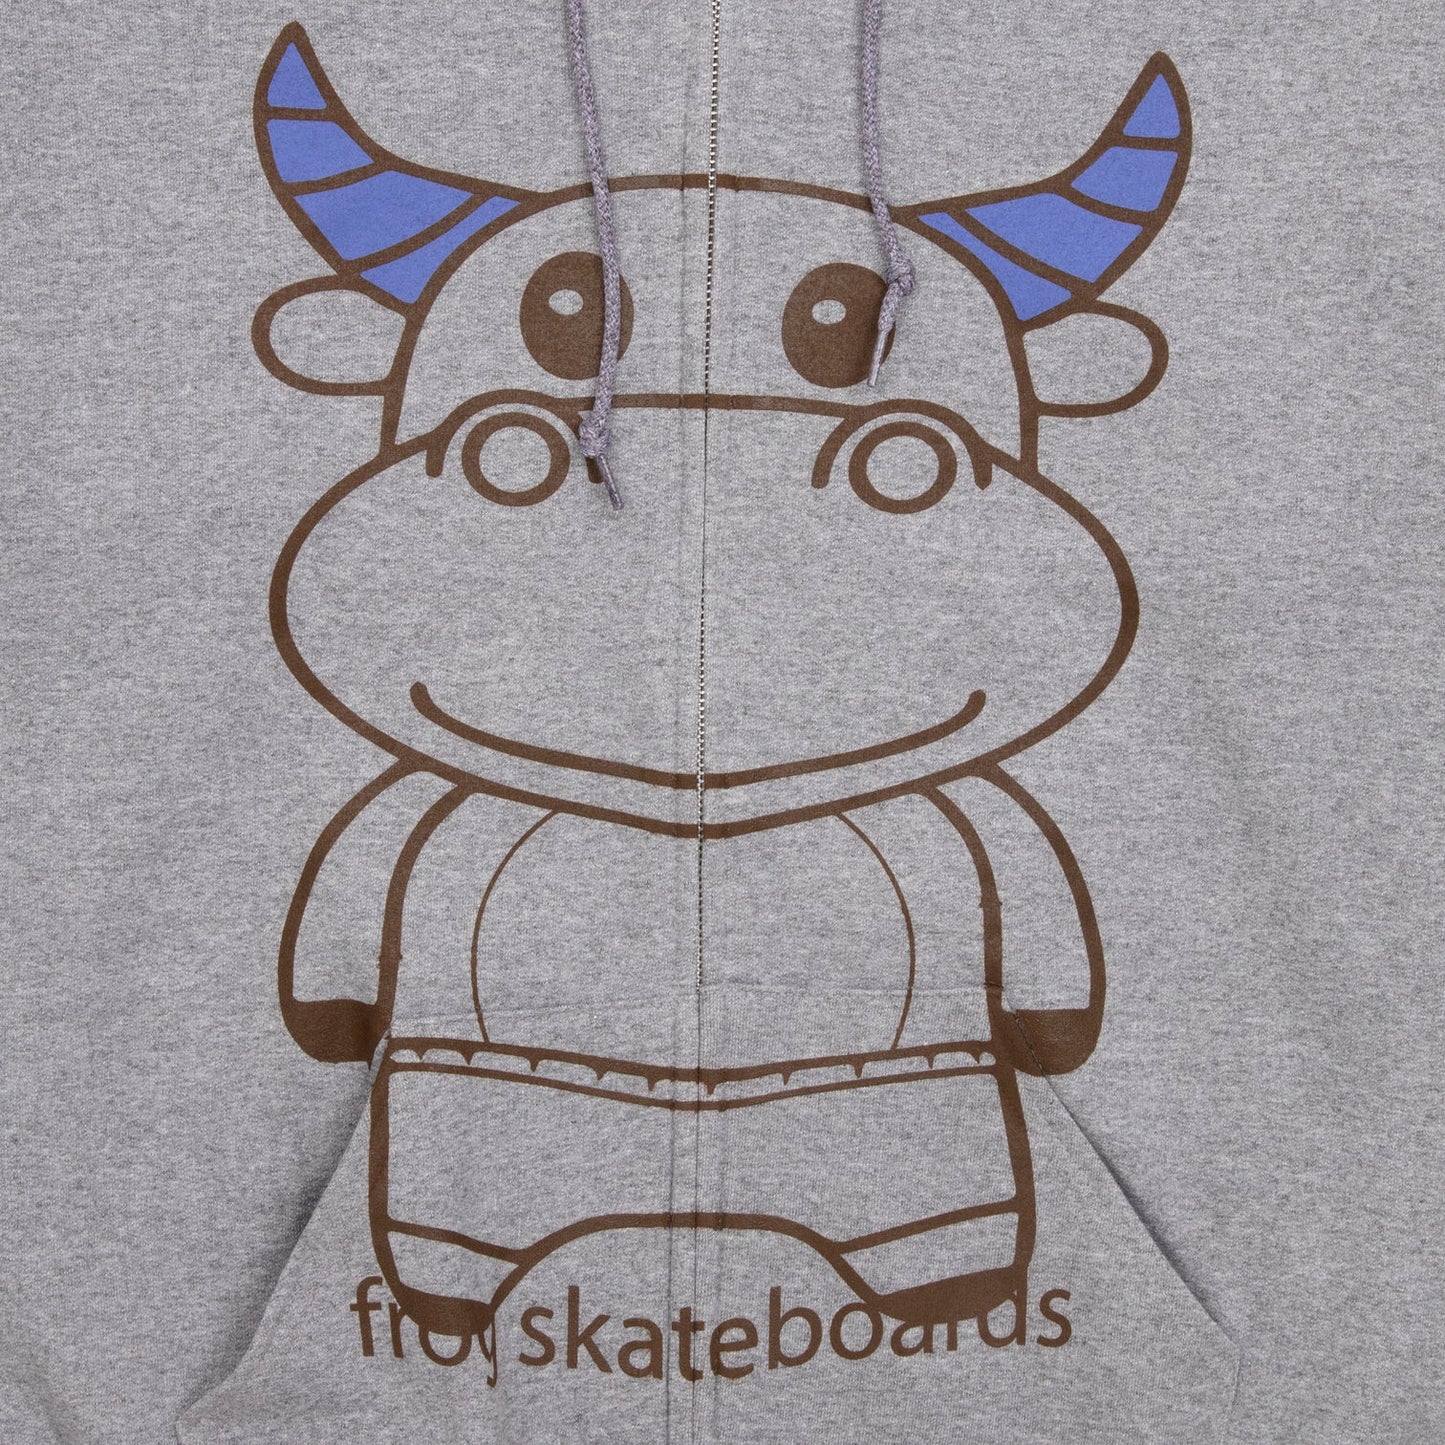 FROG SKATEBOARDS TOTALLY AWESOME ZIP HOODIE ASH GREY